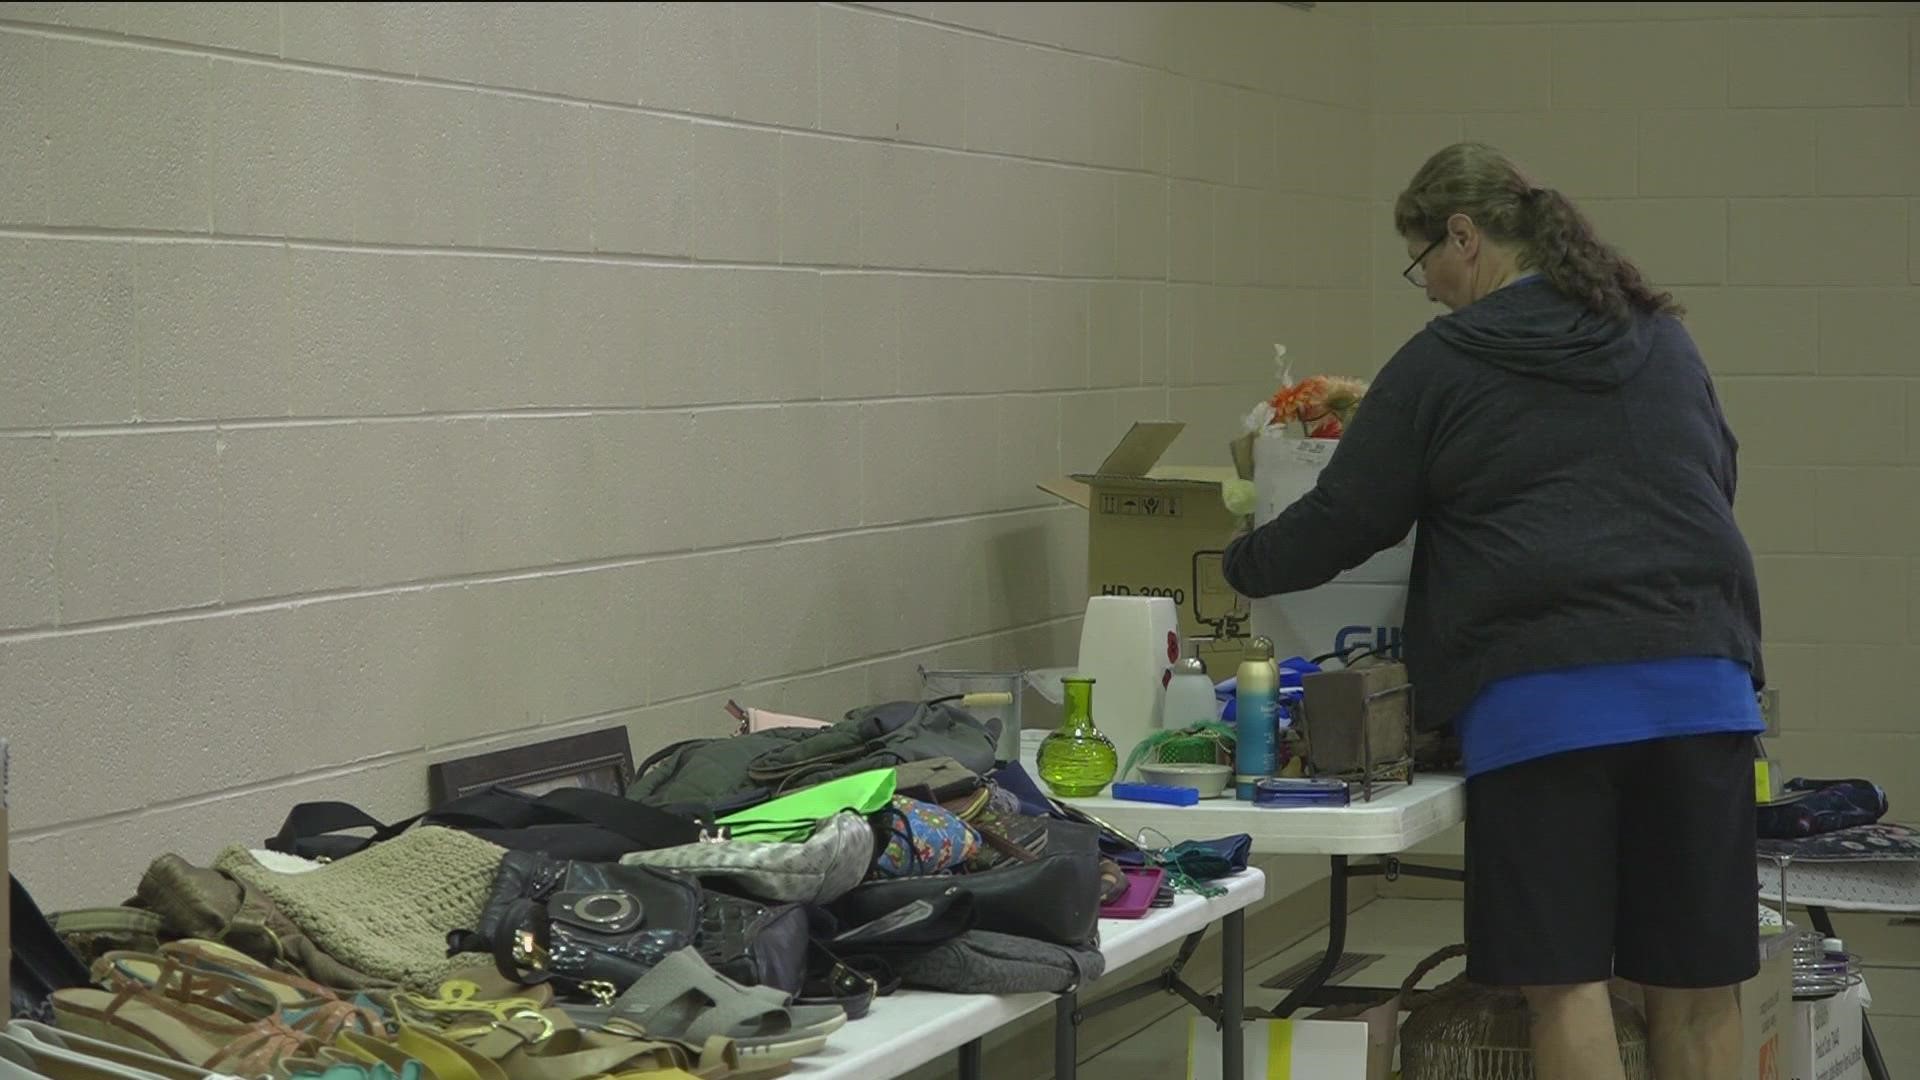 Fairgreen Presbyterian Church partnered with the Red Cross to distribute donated items to families affected by a fire at Hunt Club Apartments in Sylvania on Friday.